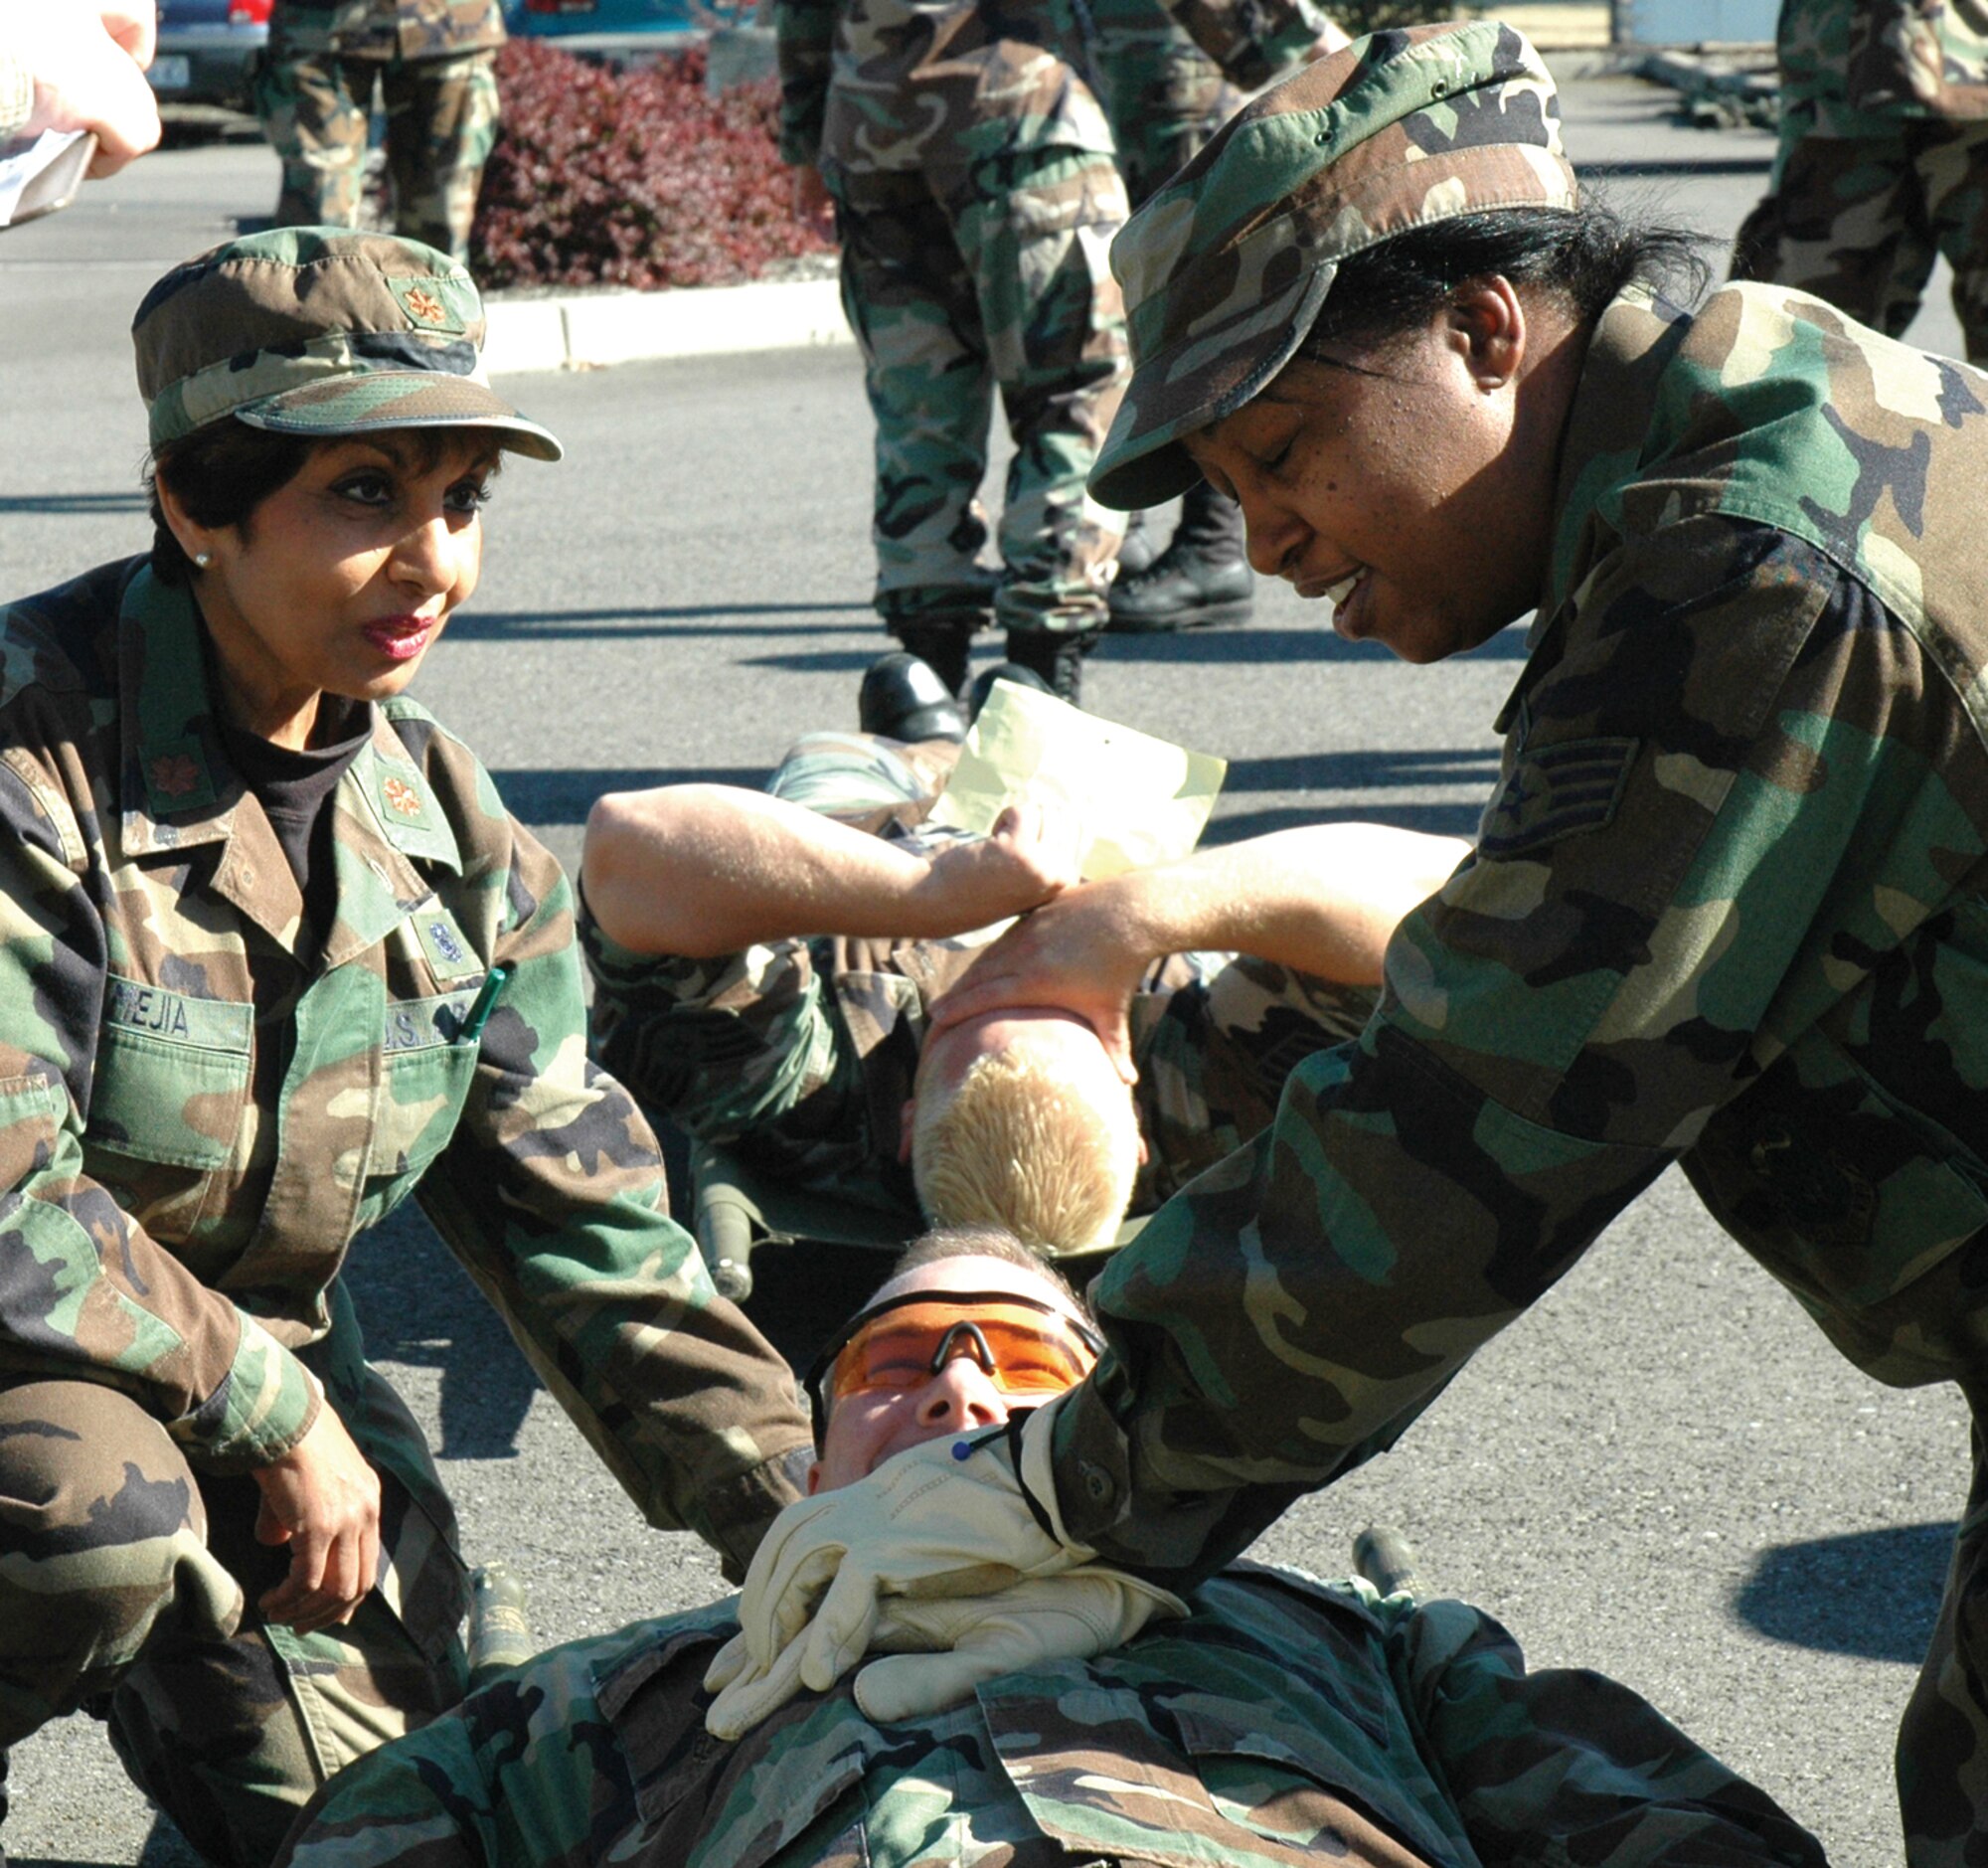 McCHORD AIR FORCE BASE, Wash., - Maj. Joyce Mejia, (left) a clinical nurse, and Staff Sgt. Debra Levine, a medical technician, perform mock CPR on Master Sgt. Charles Miller, a paramedic, during a 446th Aeromedical Staging Squadron mass casualty exercise Sept. 24. More than 100 ASTS Reservists participated in the annual exercise.  (USAF photo by Capt. Jennifer Gerhardt)